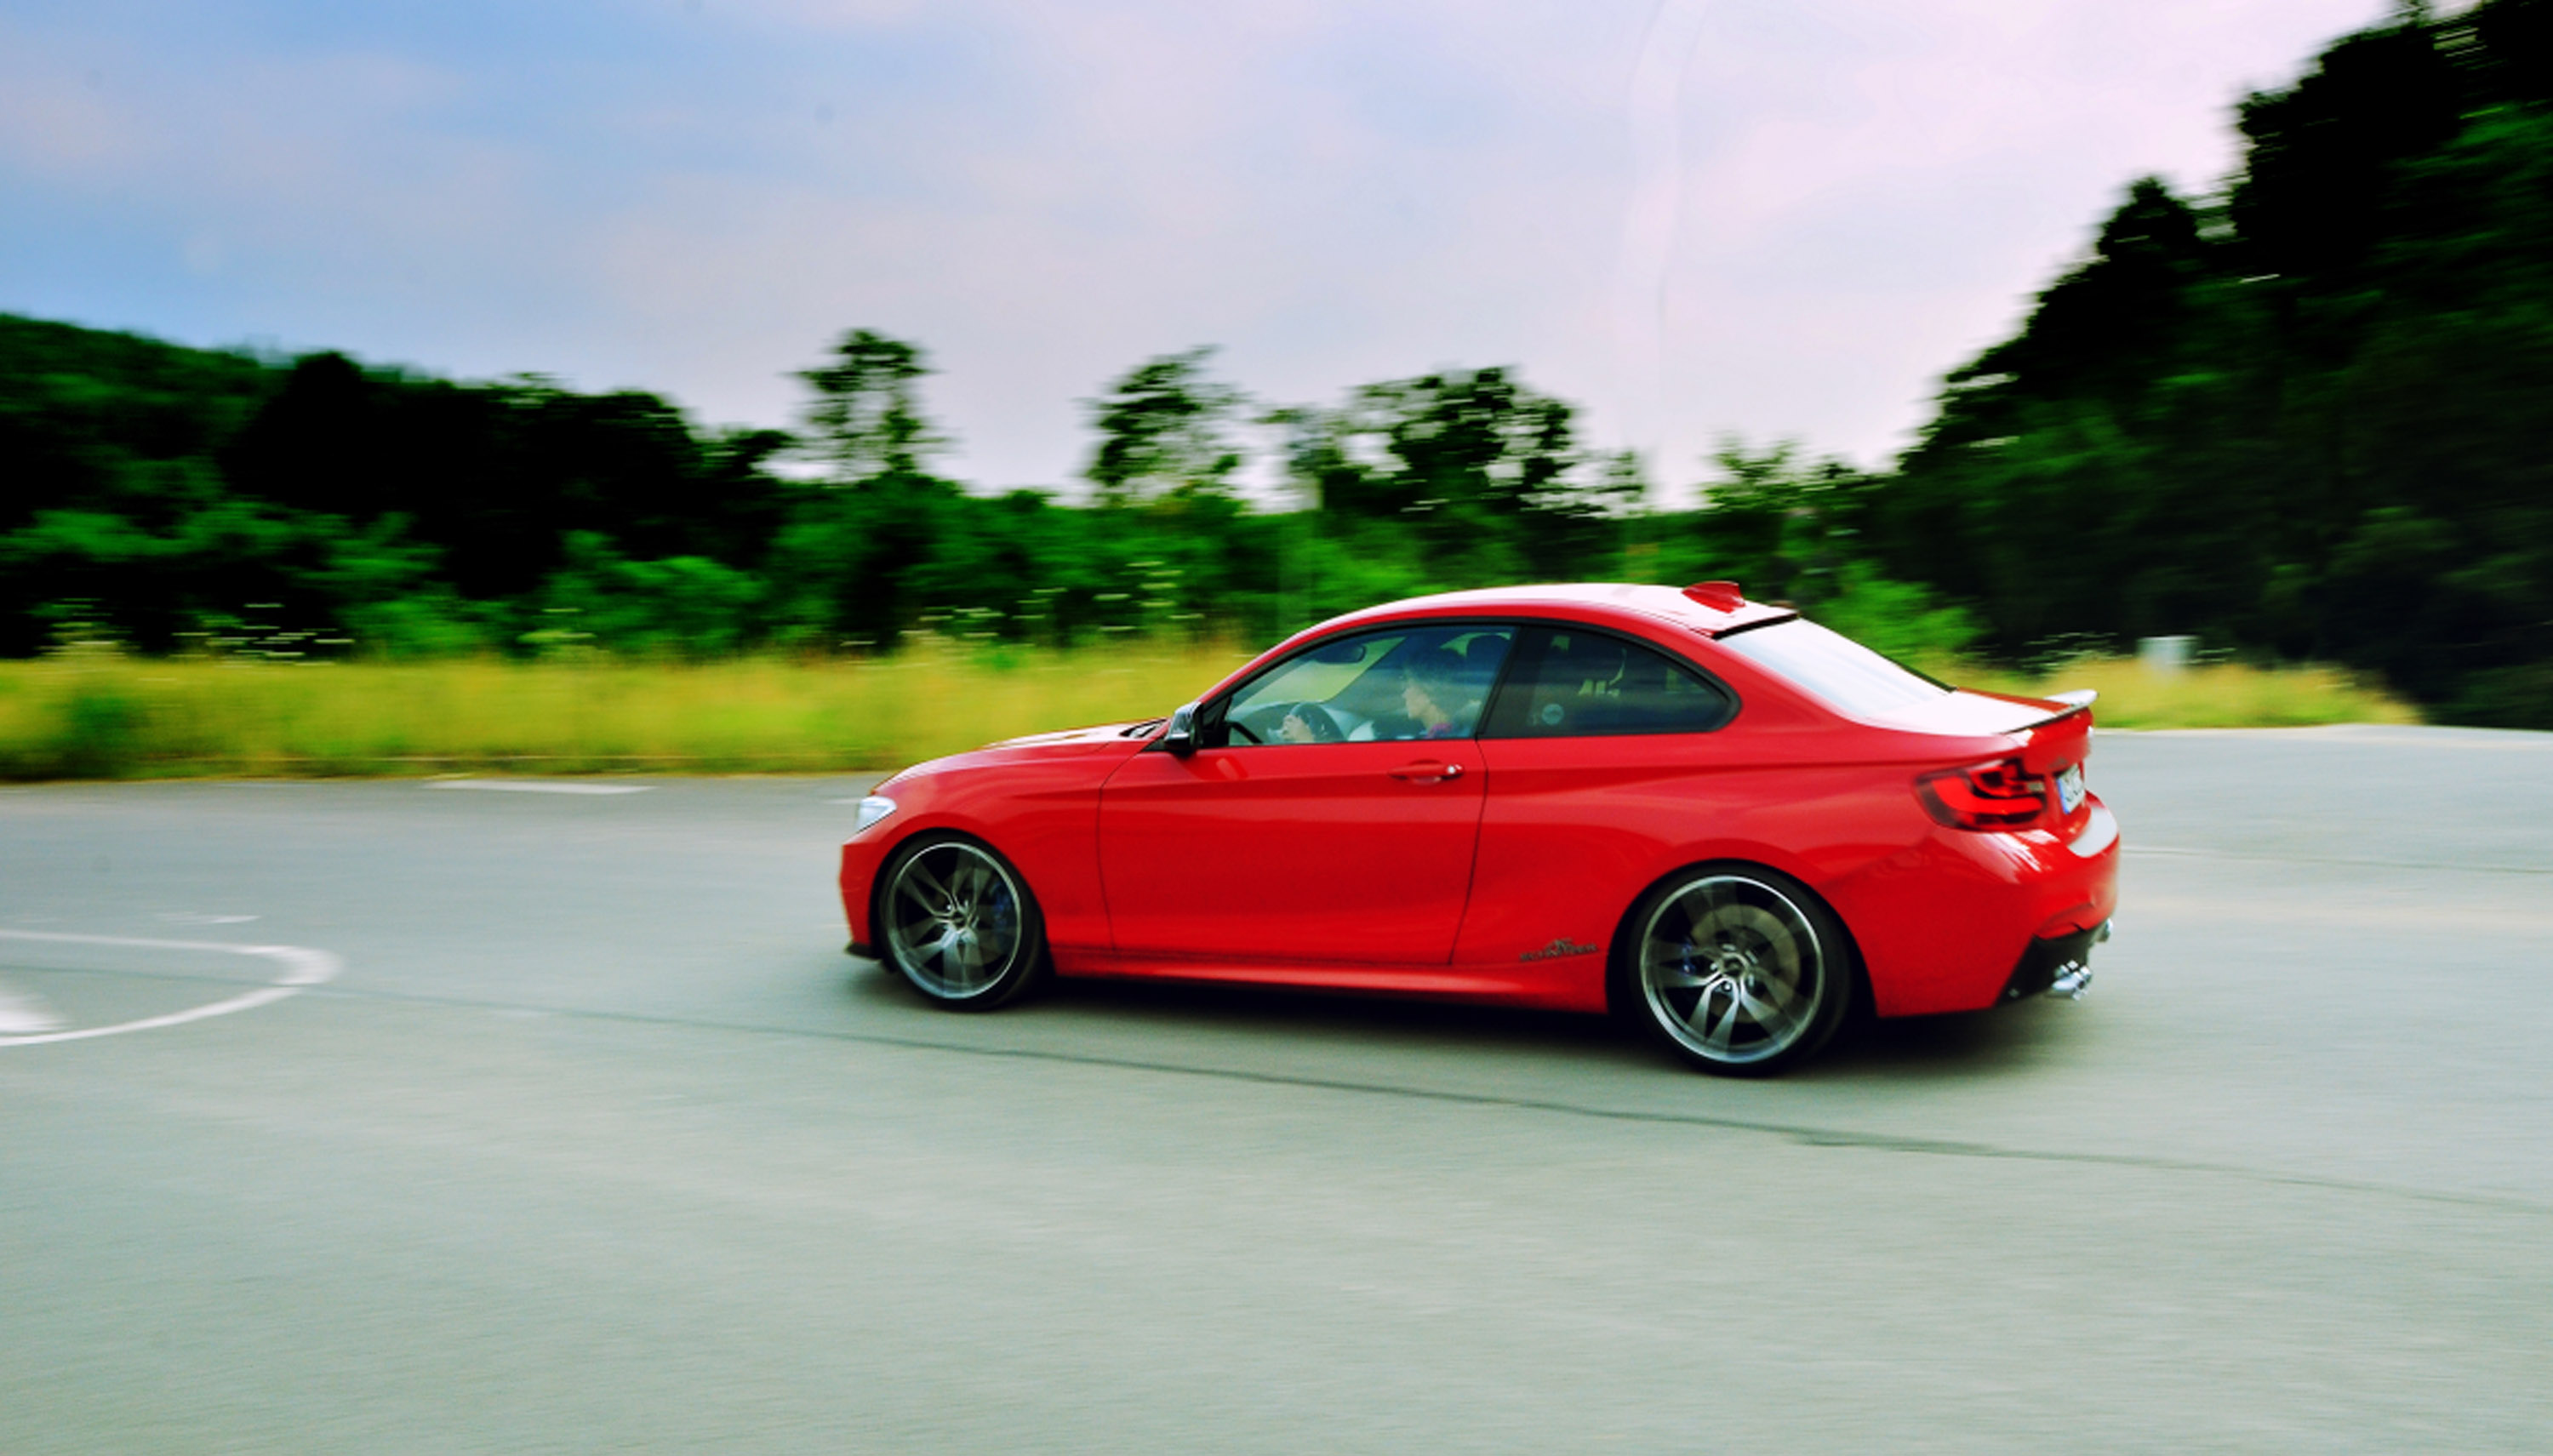 AC Schnitzer BMW 2-Series Coupe